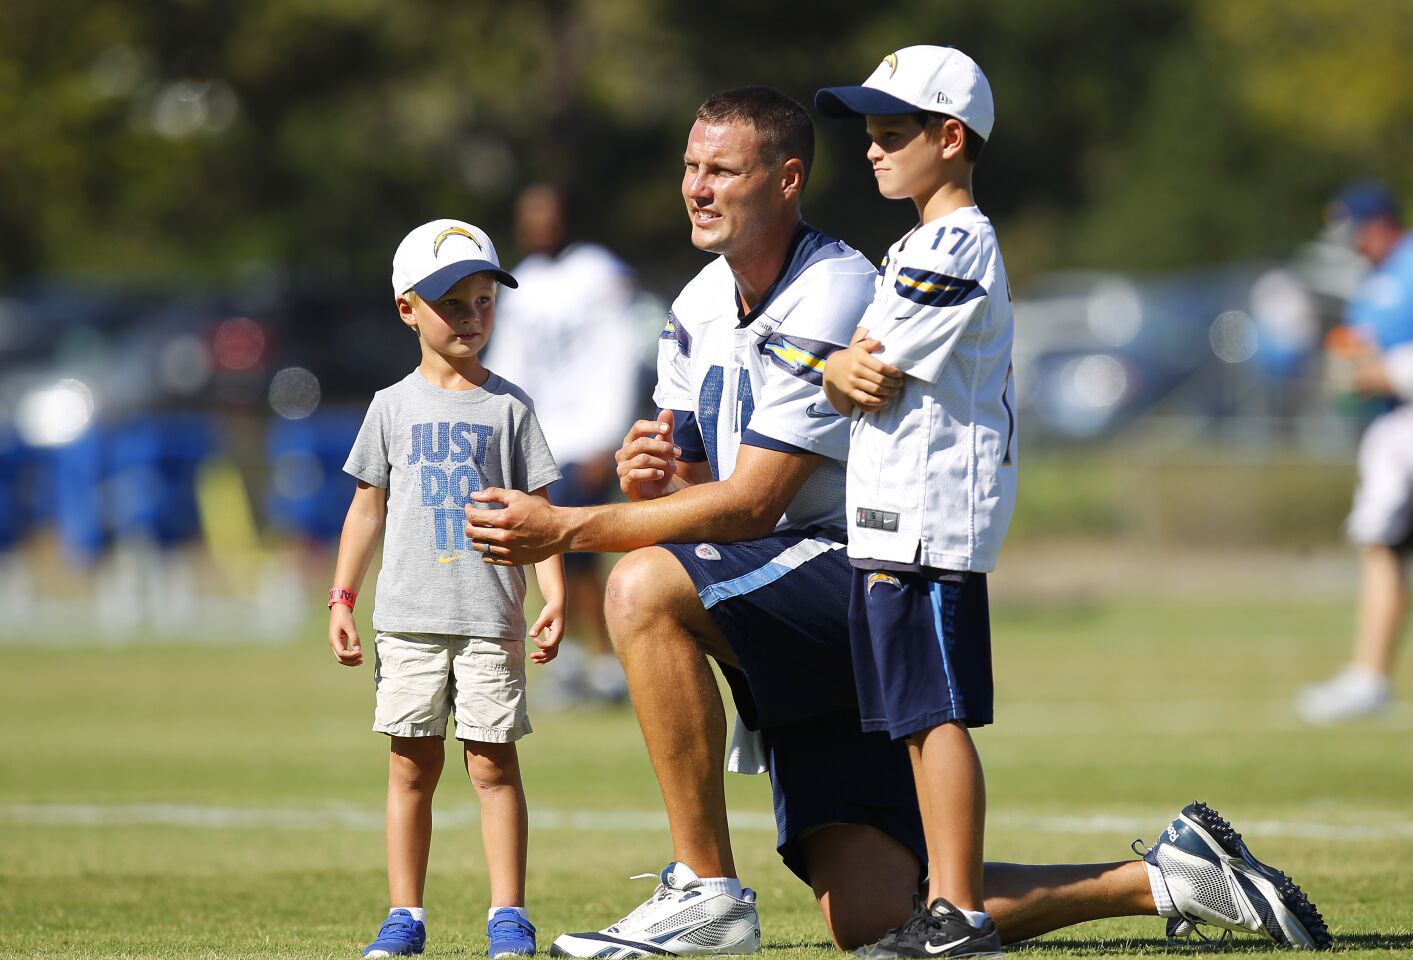 Chargere quarterback Philip Rivers looks on with his sons during a Chargers training camp practice on August 15, 2016.